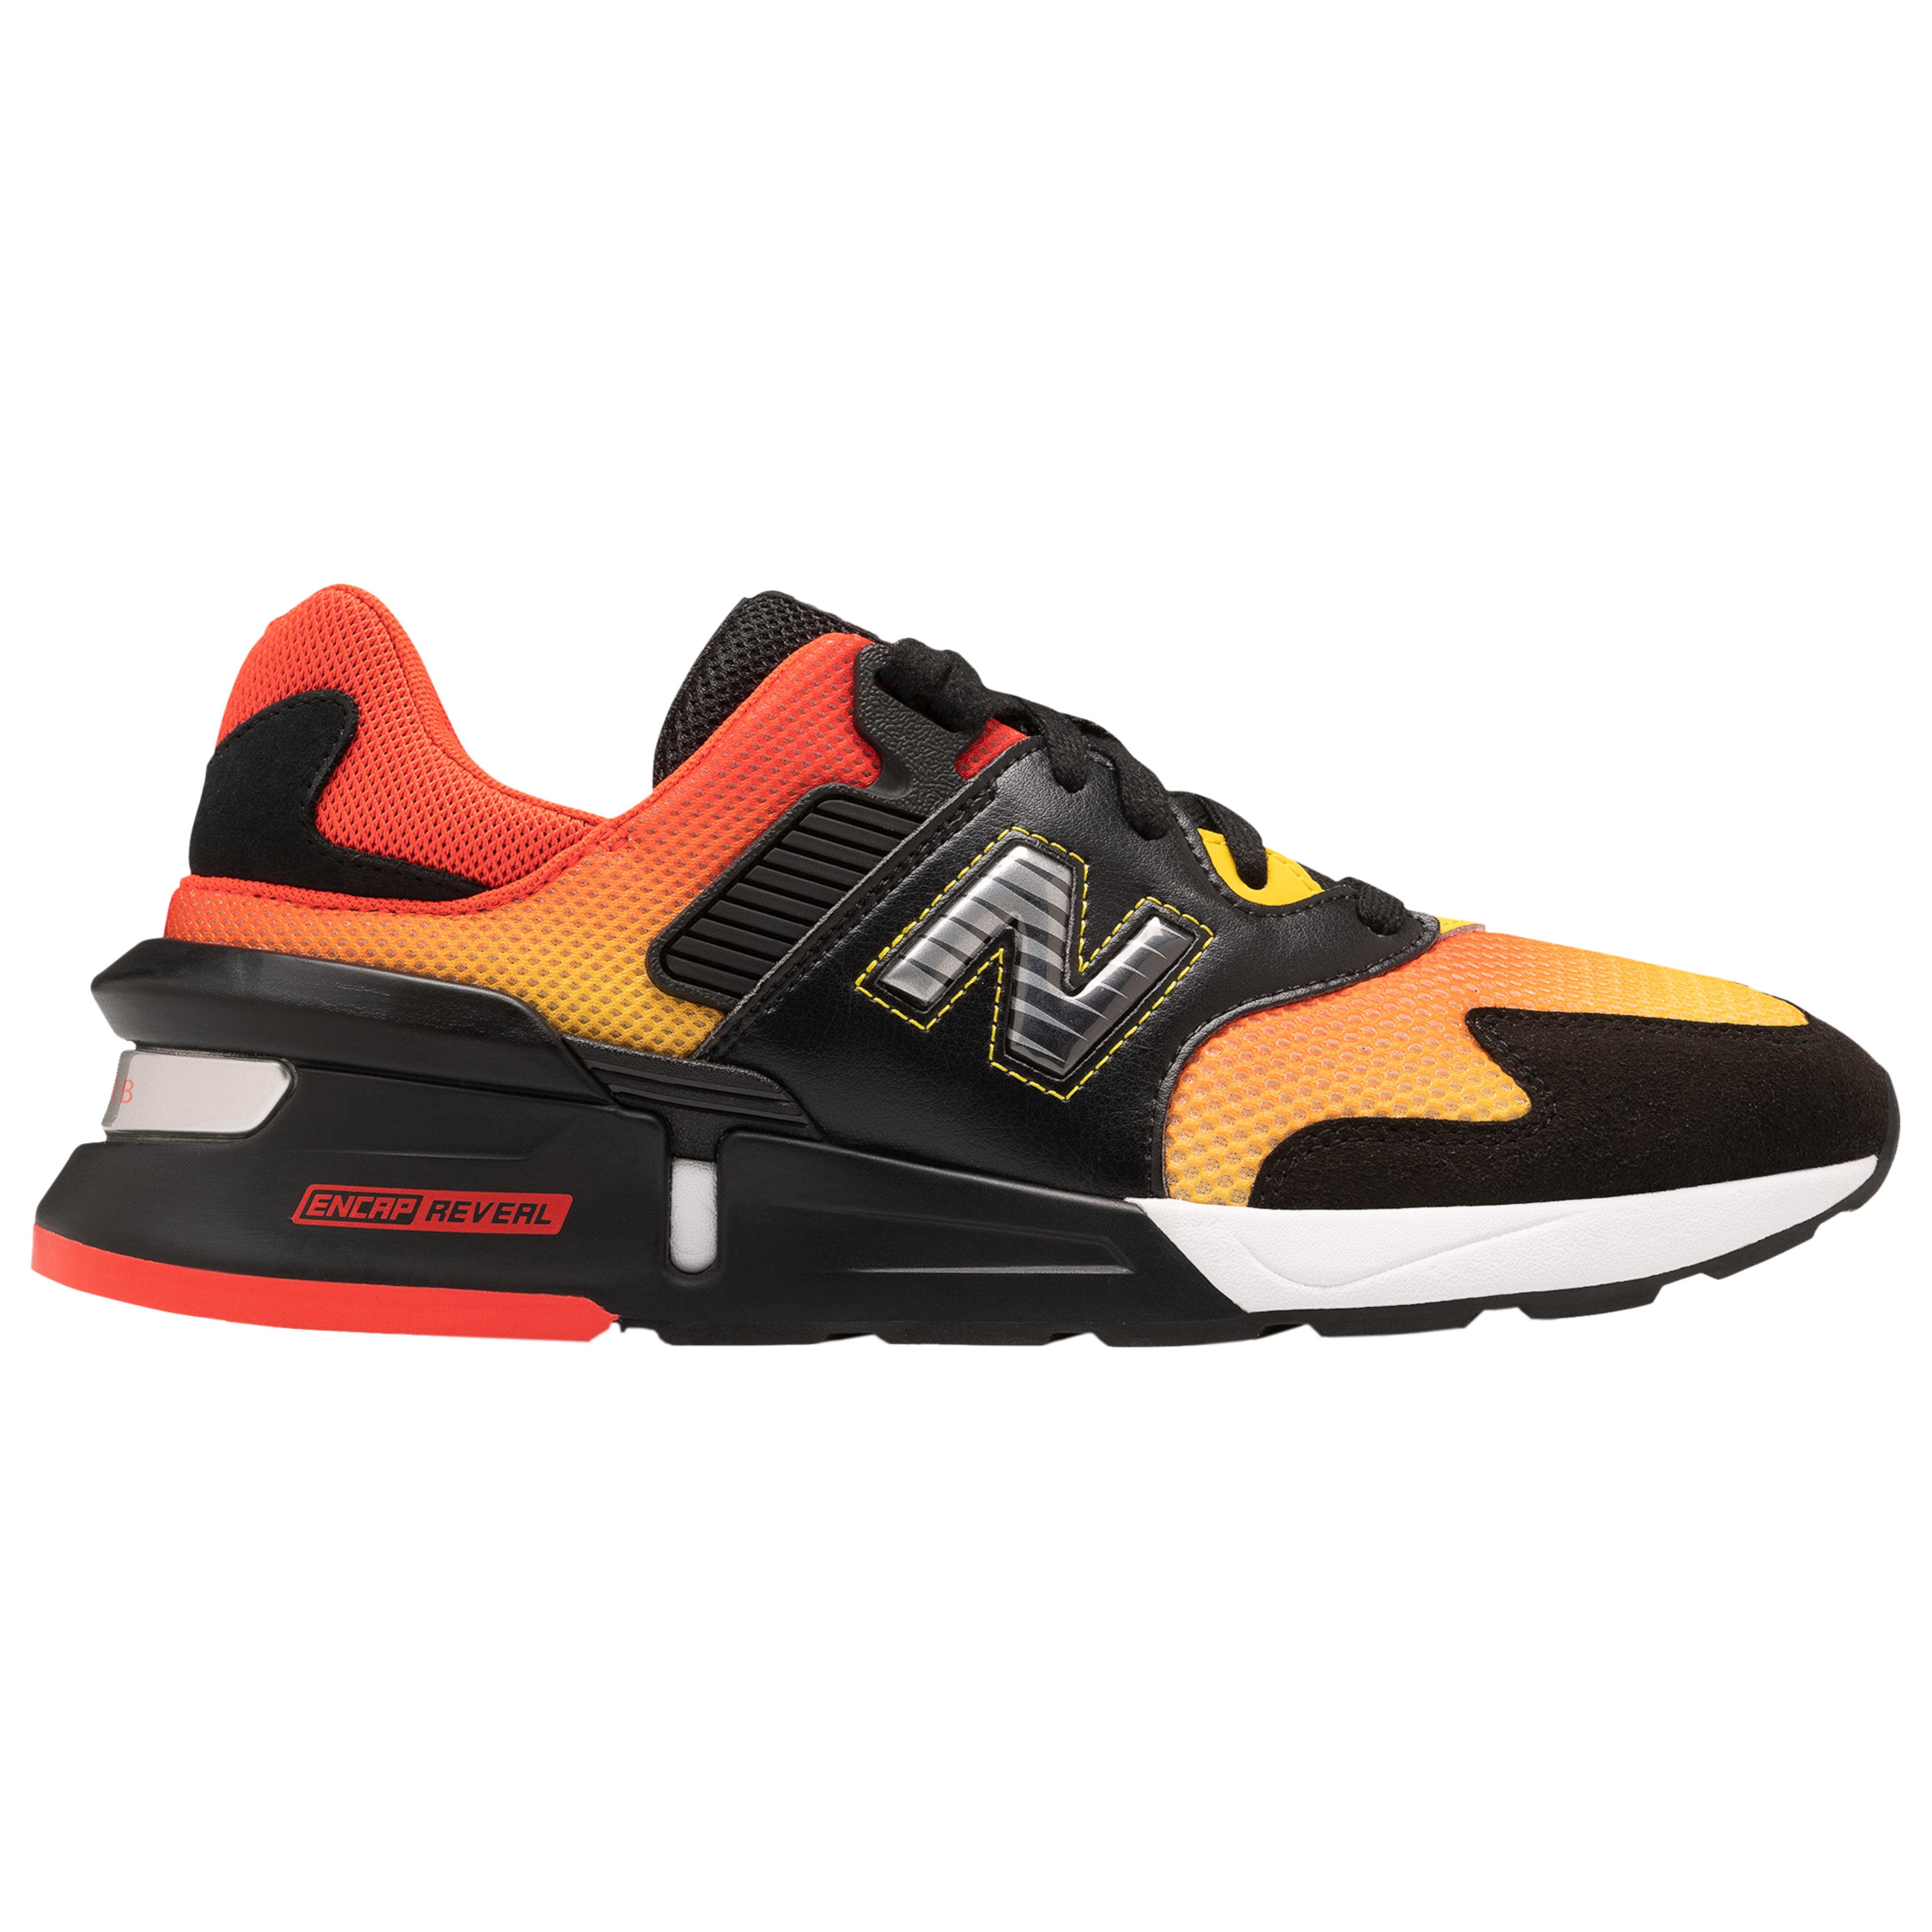 New Balance Synthetic 997 Sport in Black for Men - Save 10% - Lyst